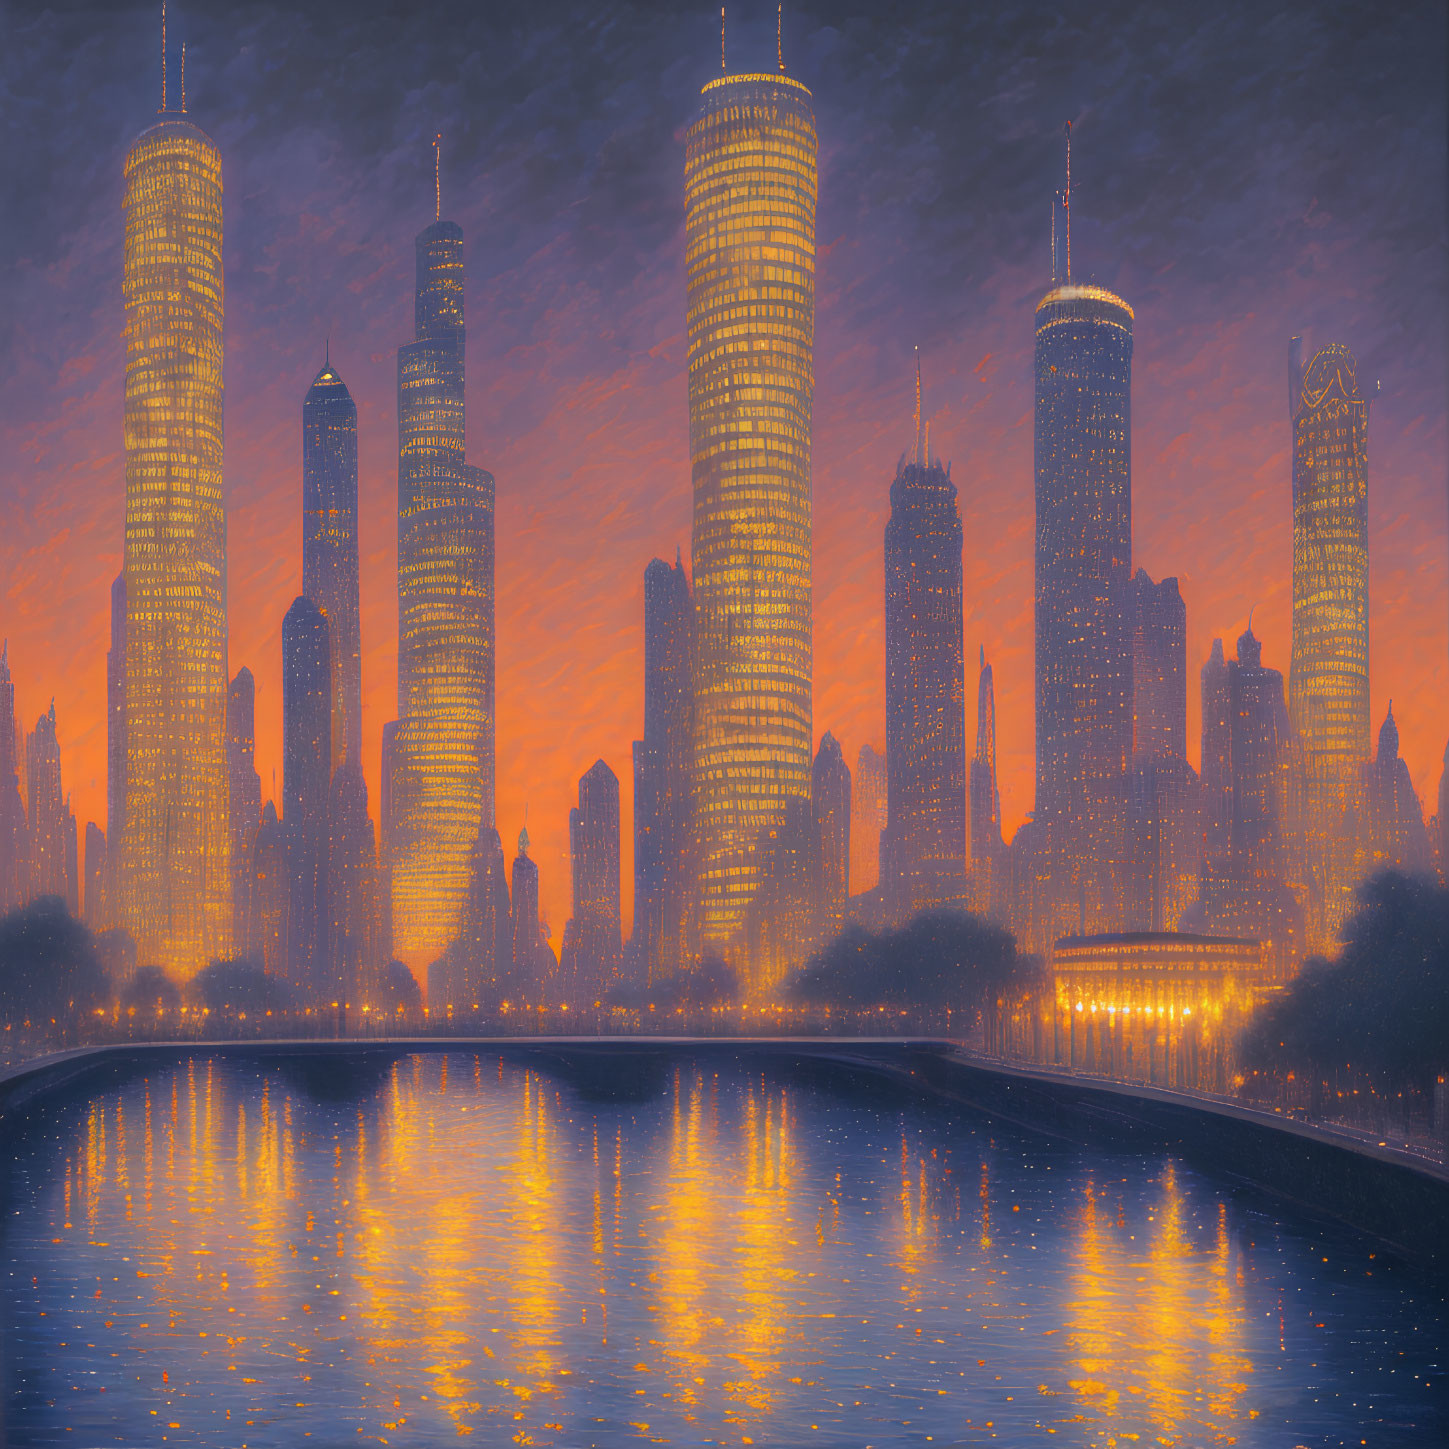 Cityscape with illuminated skyscrapers at dusk by tranquil river